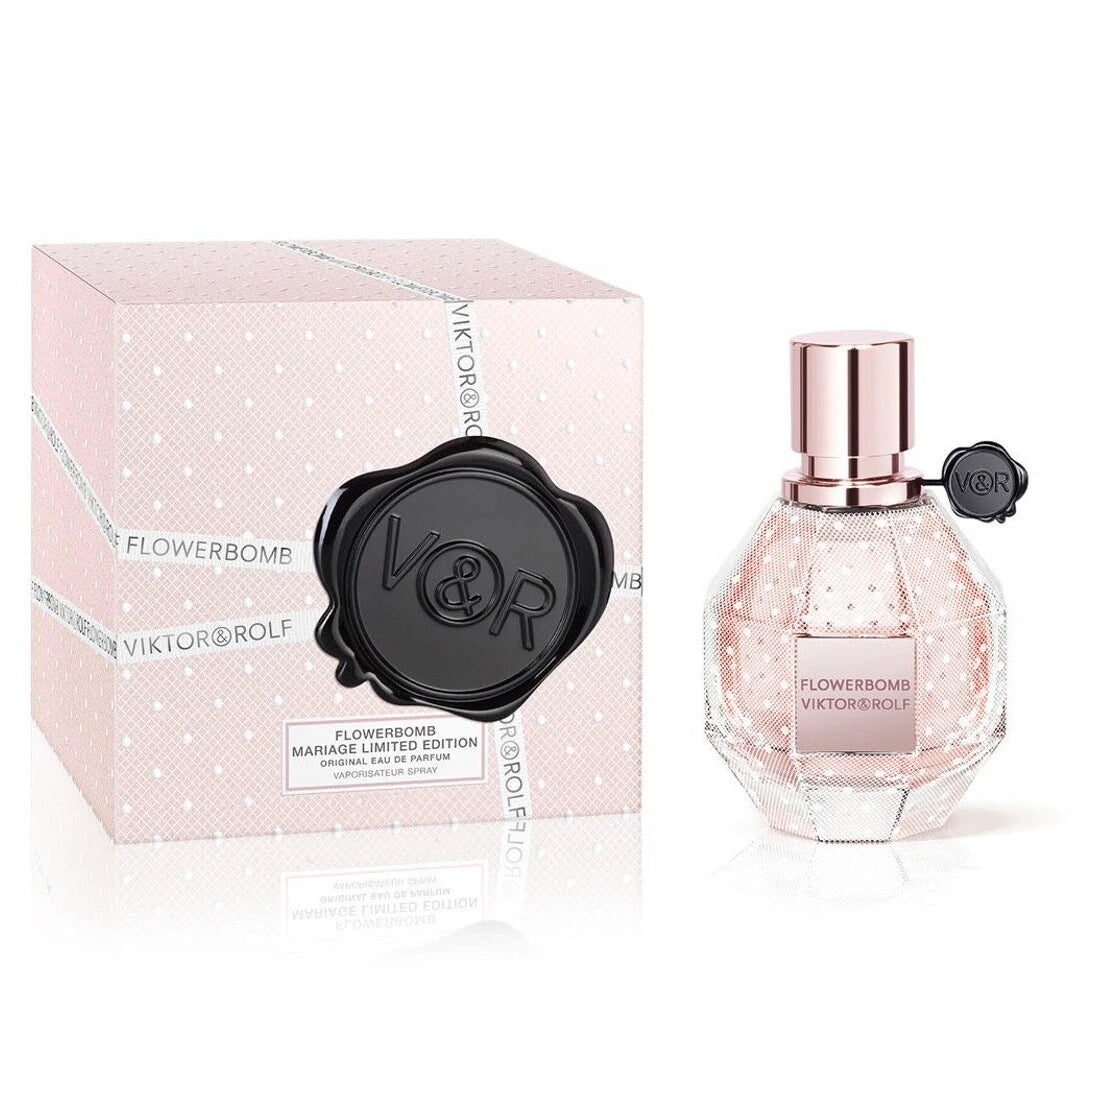 <span data-mce-fragment="1">Flowerbomb Mariage Edition is dressed in a white, couture plumetis veil.</span><br data-mce-fragment="1"><span data-mce-fragment="1">The limited-edition bottle contains the classic Flowerbomb fragrance, an explosion of thousands of flowers with the power to turn everything positive.</span><br data-mce-fragment="1"><span data-mce-fragment="1">Grounded in patchouli and vanilla, and enchanted with a whirl of jasmine and rose, Flowerbomb is the ultra-addictive women's fragrance, perfect for this very special time.</span><br data-mce-fragment="1"><br data-mce-fragment="1"><span data-mce-fragment="1">Experience this intoxicating perfume for yourself, the bride, or her bridesmaids.</span><br data-mce-fragment="1"><br data-mce-fragment="1"><strong data-mce-fragment="1">Fragrance Family:</strong><span data-mce-fragment="1"> Floral</span><br data-mce-fragment="1"><strong data-mce-fragment="1">Top Notes:</strong><span data-mce-fragment="1"> Cattleya Orchid, Freesia, and Centifolia Rose</span><br data-mce-fragment="1"><strong data-mce-fragment="1">Middle Notes:</strong><span data-mce-fragment="1"> Sambac Jasmine and India Osmanthus</span><br data-mce-fragment="1"><strong data-mce-fragment="1">Base Notes:</strong><span data-mce-fragment="1"> Patchouli and Vanilla</span>